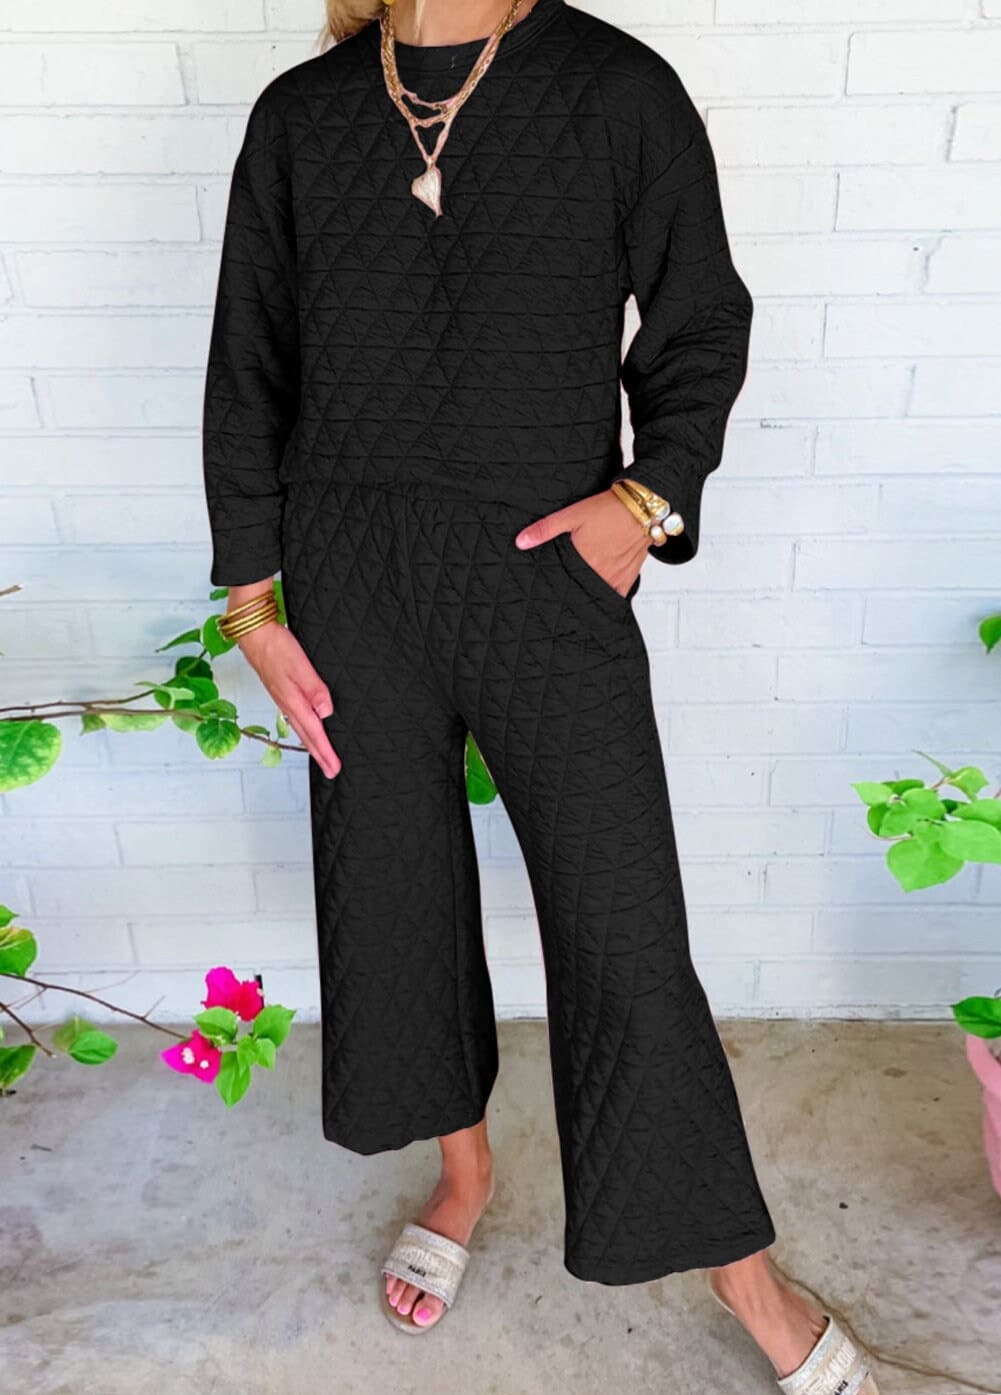 Solid Quilted Pullover and Pants Outfit-Variety of Colors Material: Material: 95% Polyester+5% Elastane  It includes a quilted pullover top and matching pants. It’s soft and comfy for all day wearing.